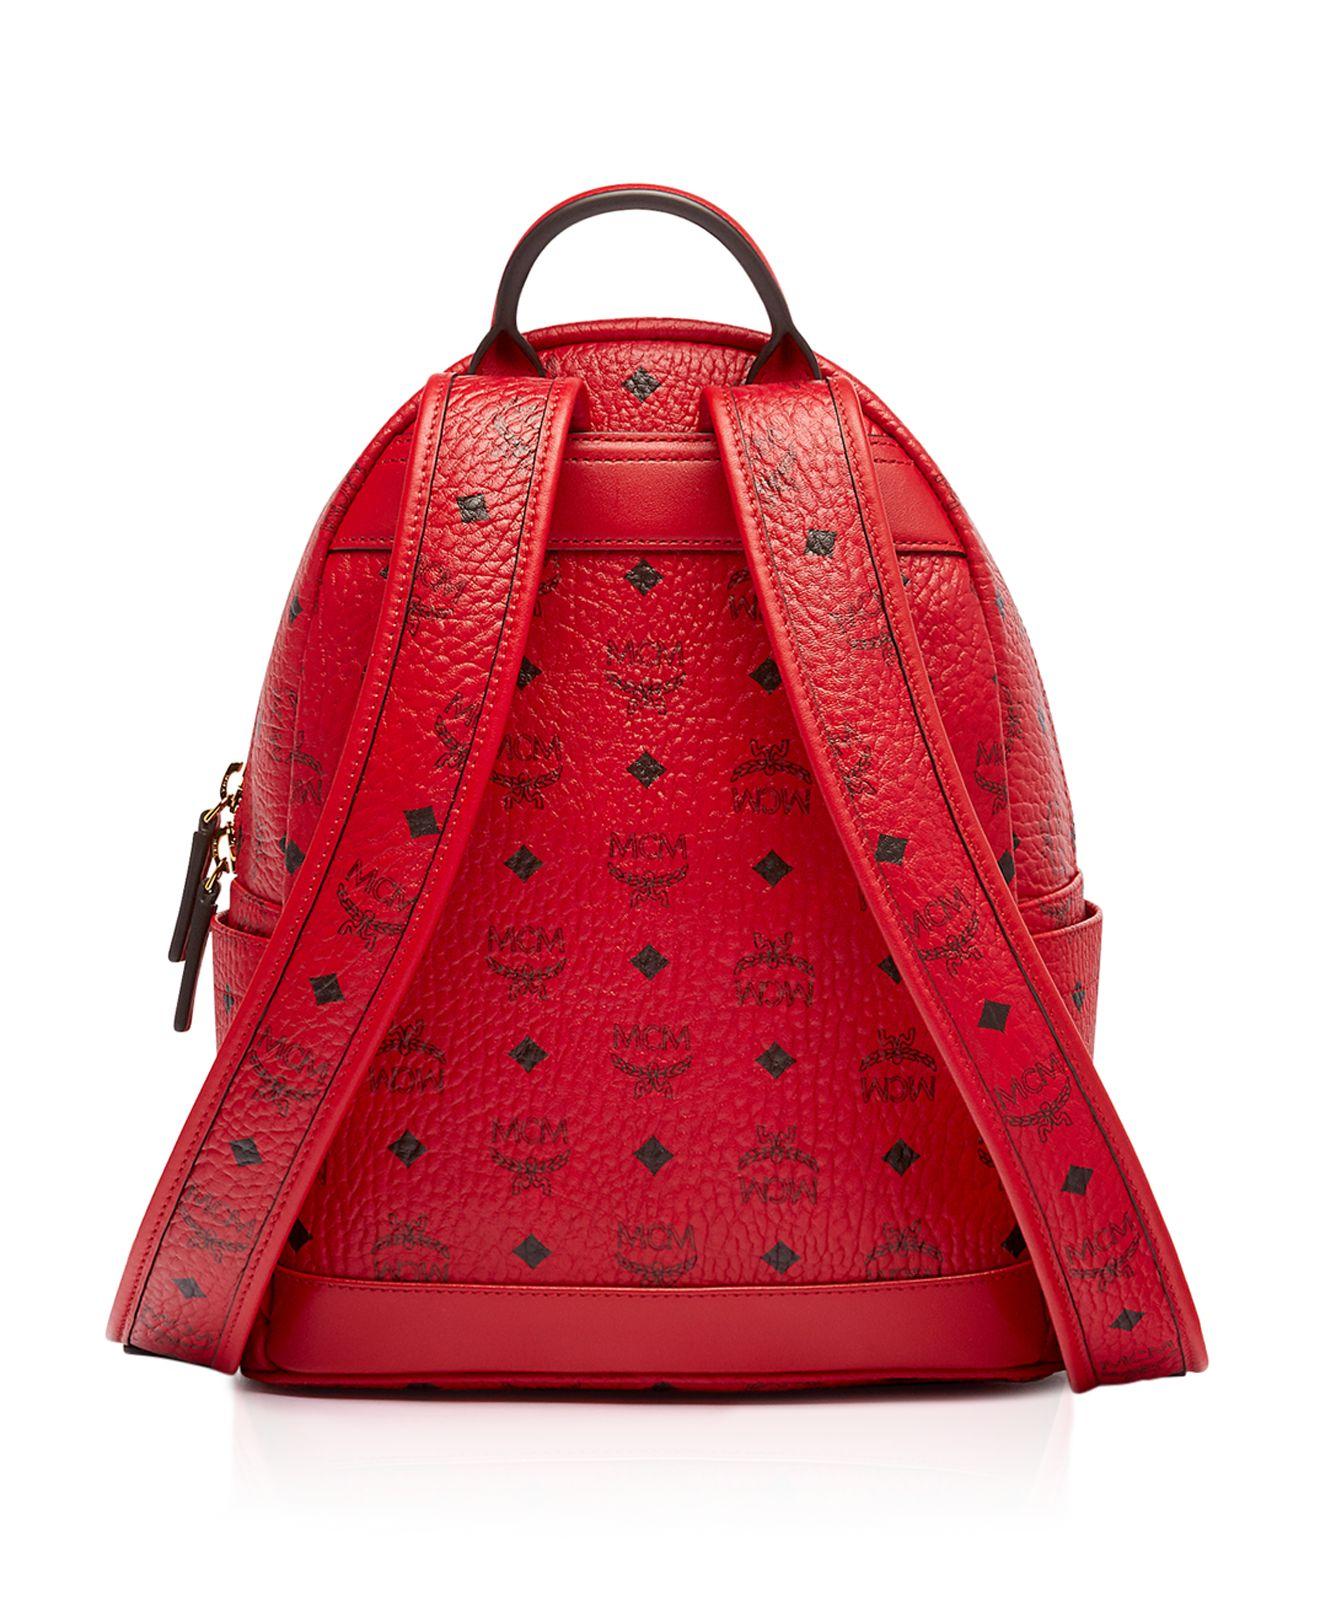 MCM Stark Small Backpack in Red - Lyst